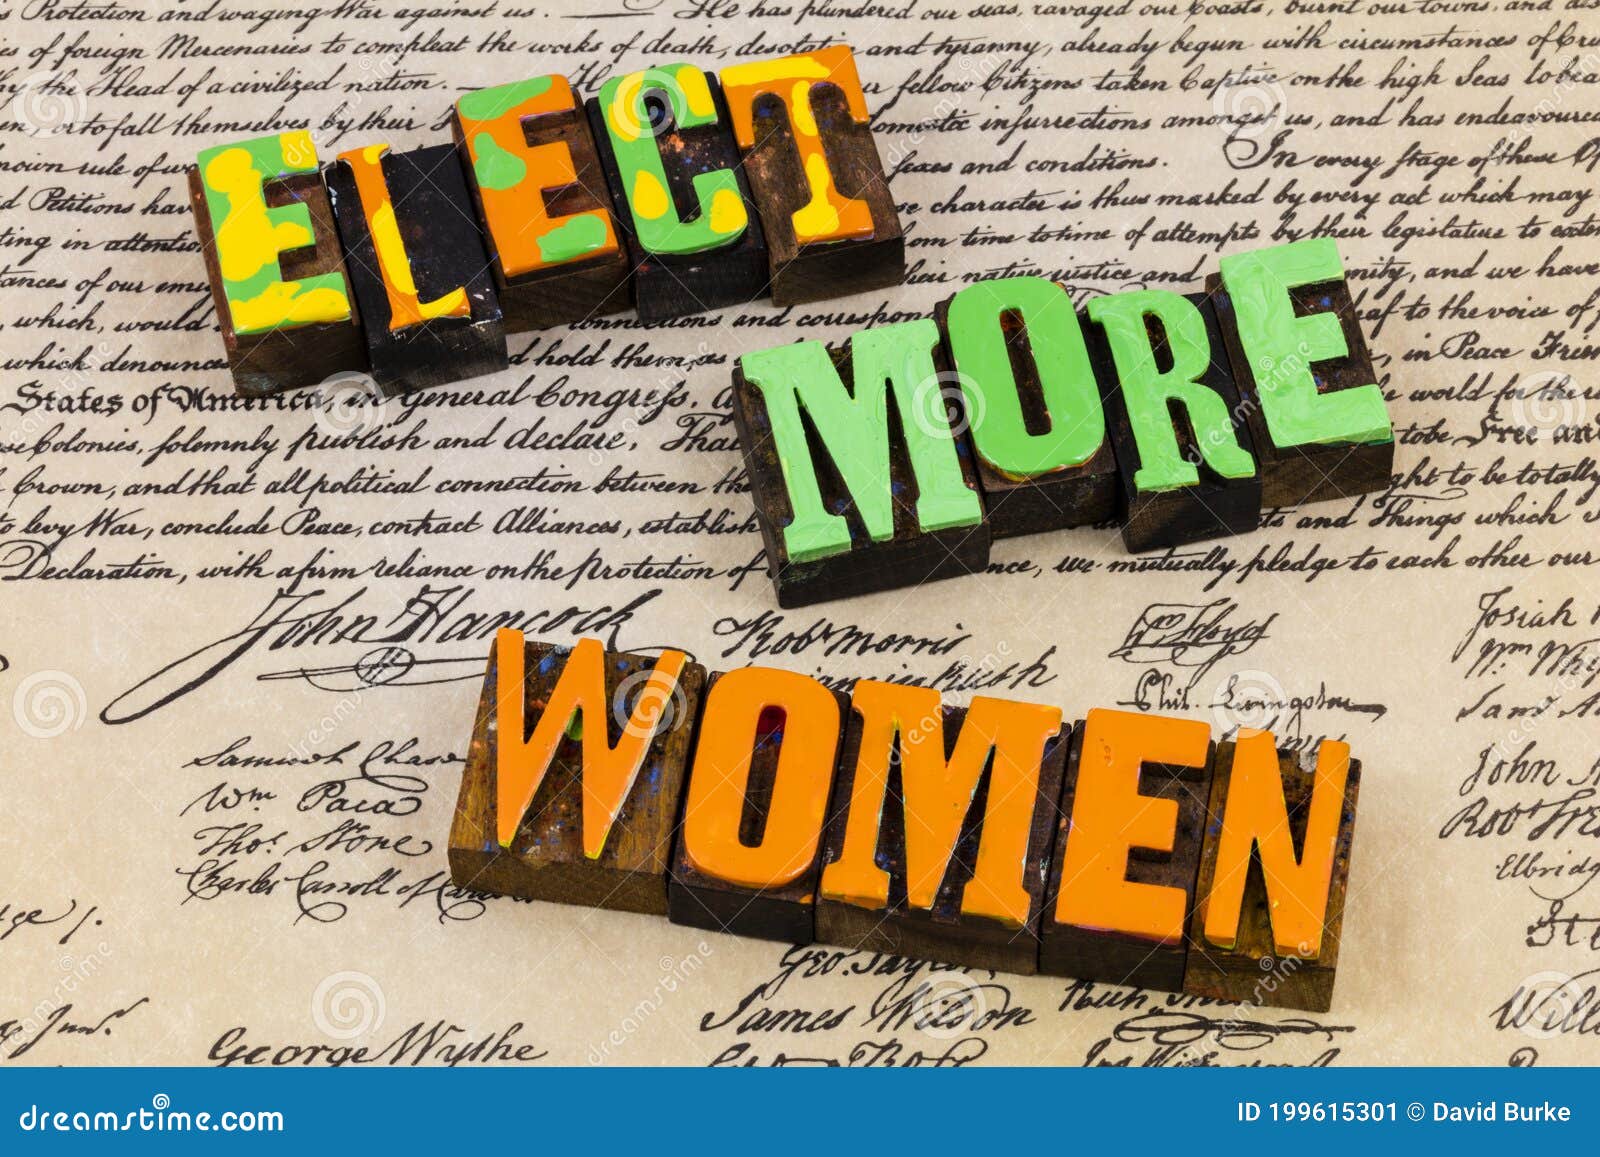 elect more women political office election female vote